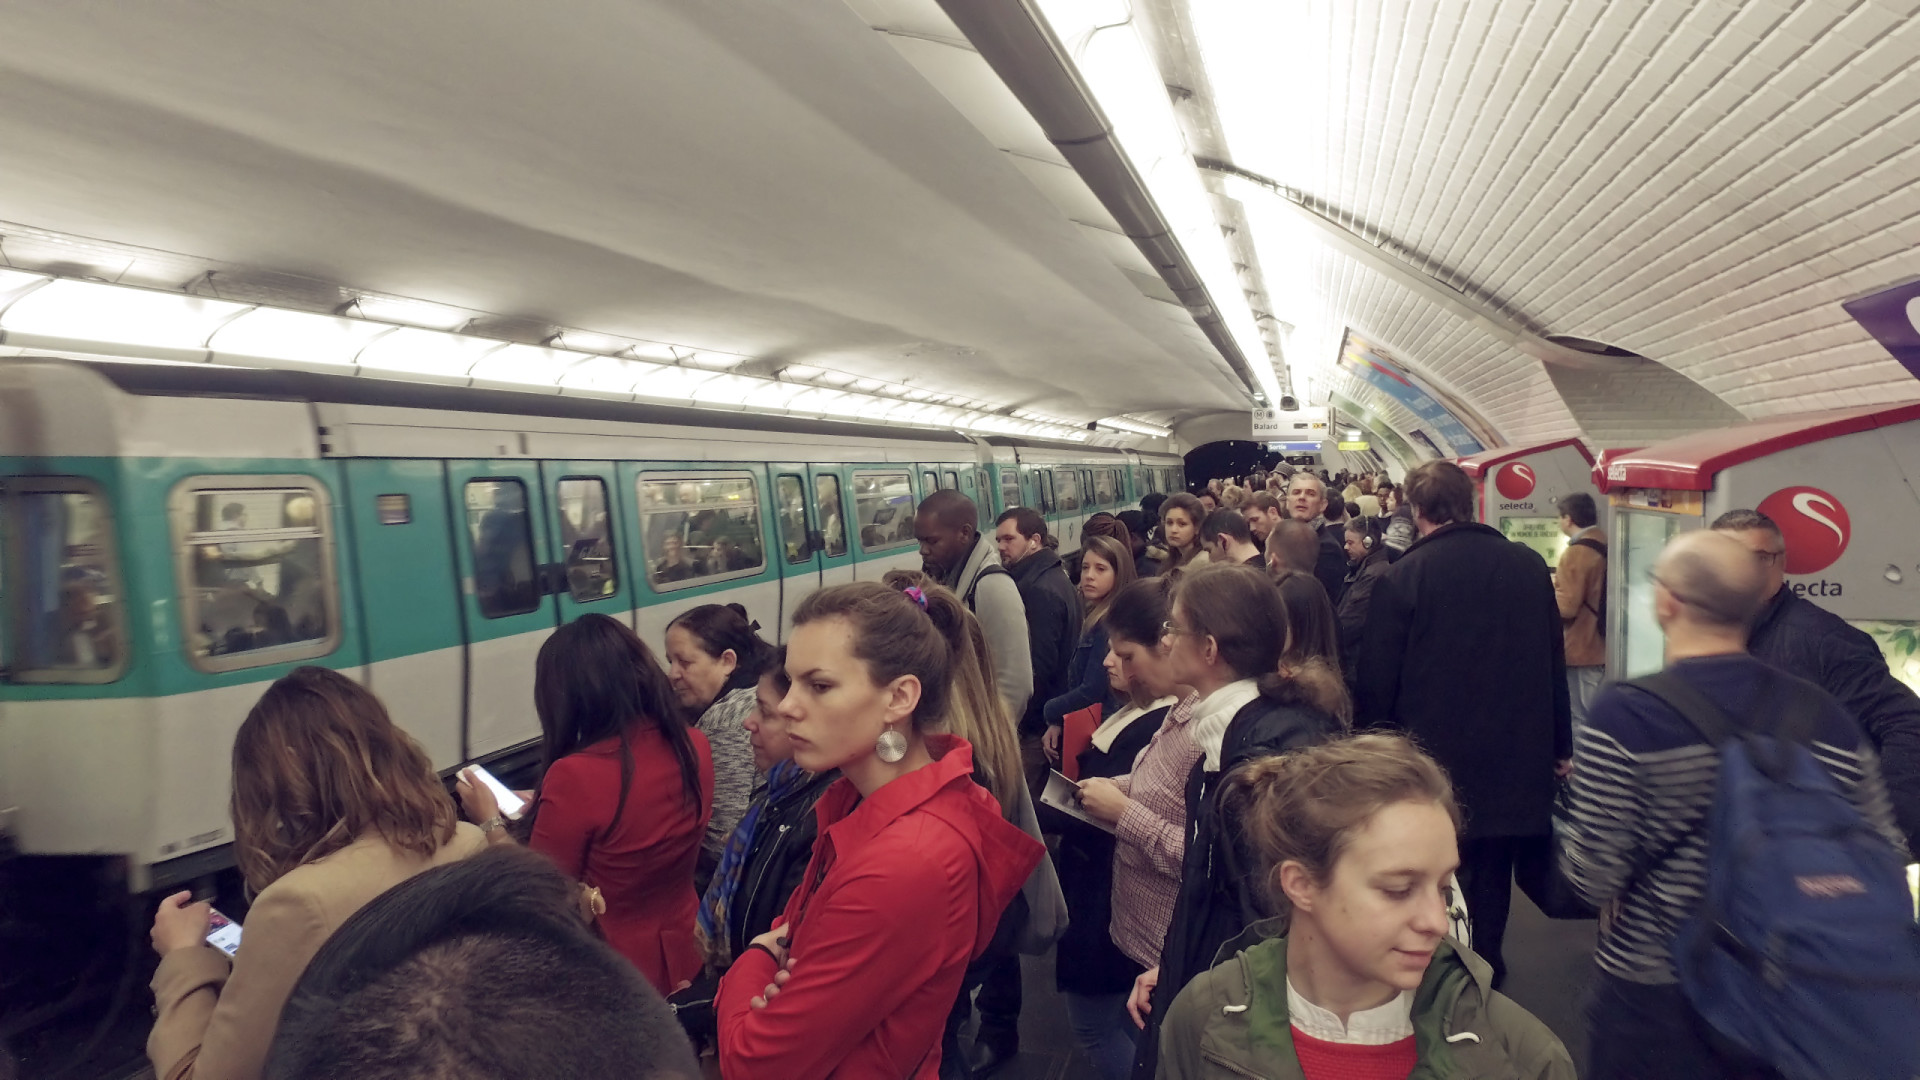 <p>But people actually live in Paris, so be sure to avoid taking any public transport during rush hour. The good thing with central Paris is that you can walk around to most places. Do that instead, or hop on a boat tour on the Seine river.</p><p>You may also like:<a href="https://www.starsinsider.com/n/299215?utm_source=msn.com&utm_medium=display&utm_campaign=referral_description&utm_content=524572en-us"> Famous people who lost their significant other</a></p>